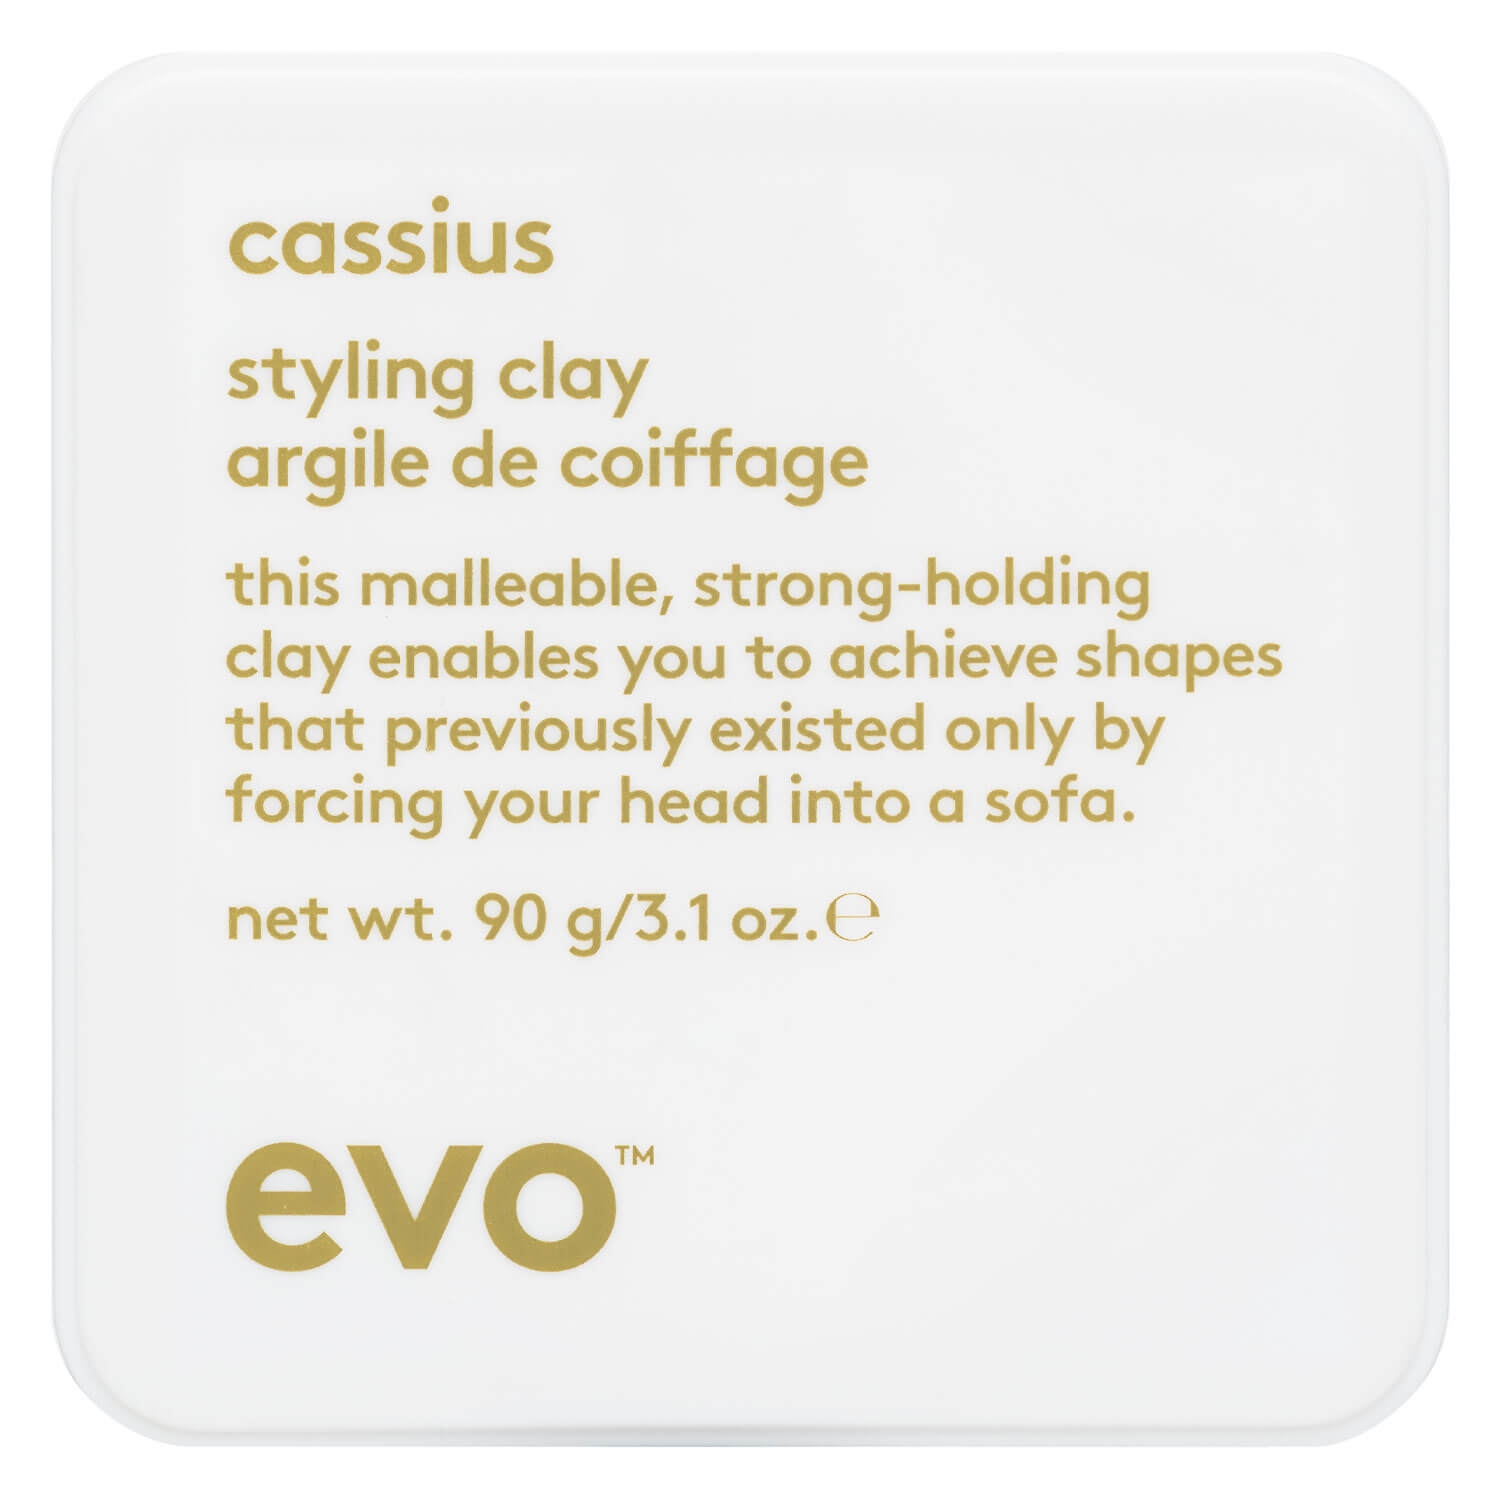 Product image from evo style - cassius styling clay